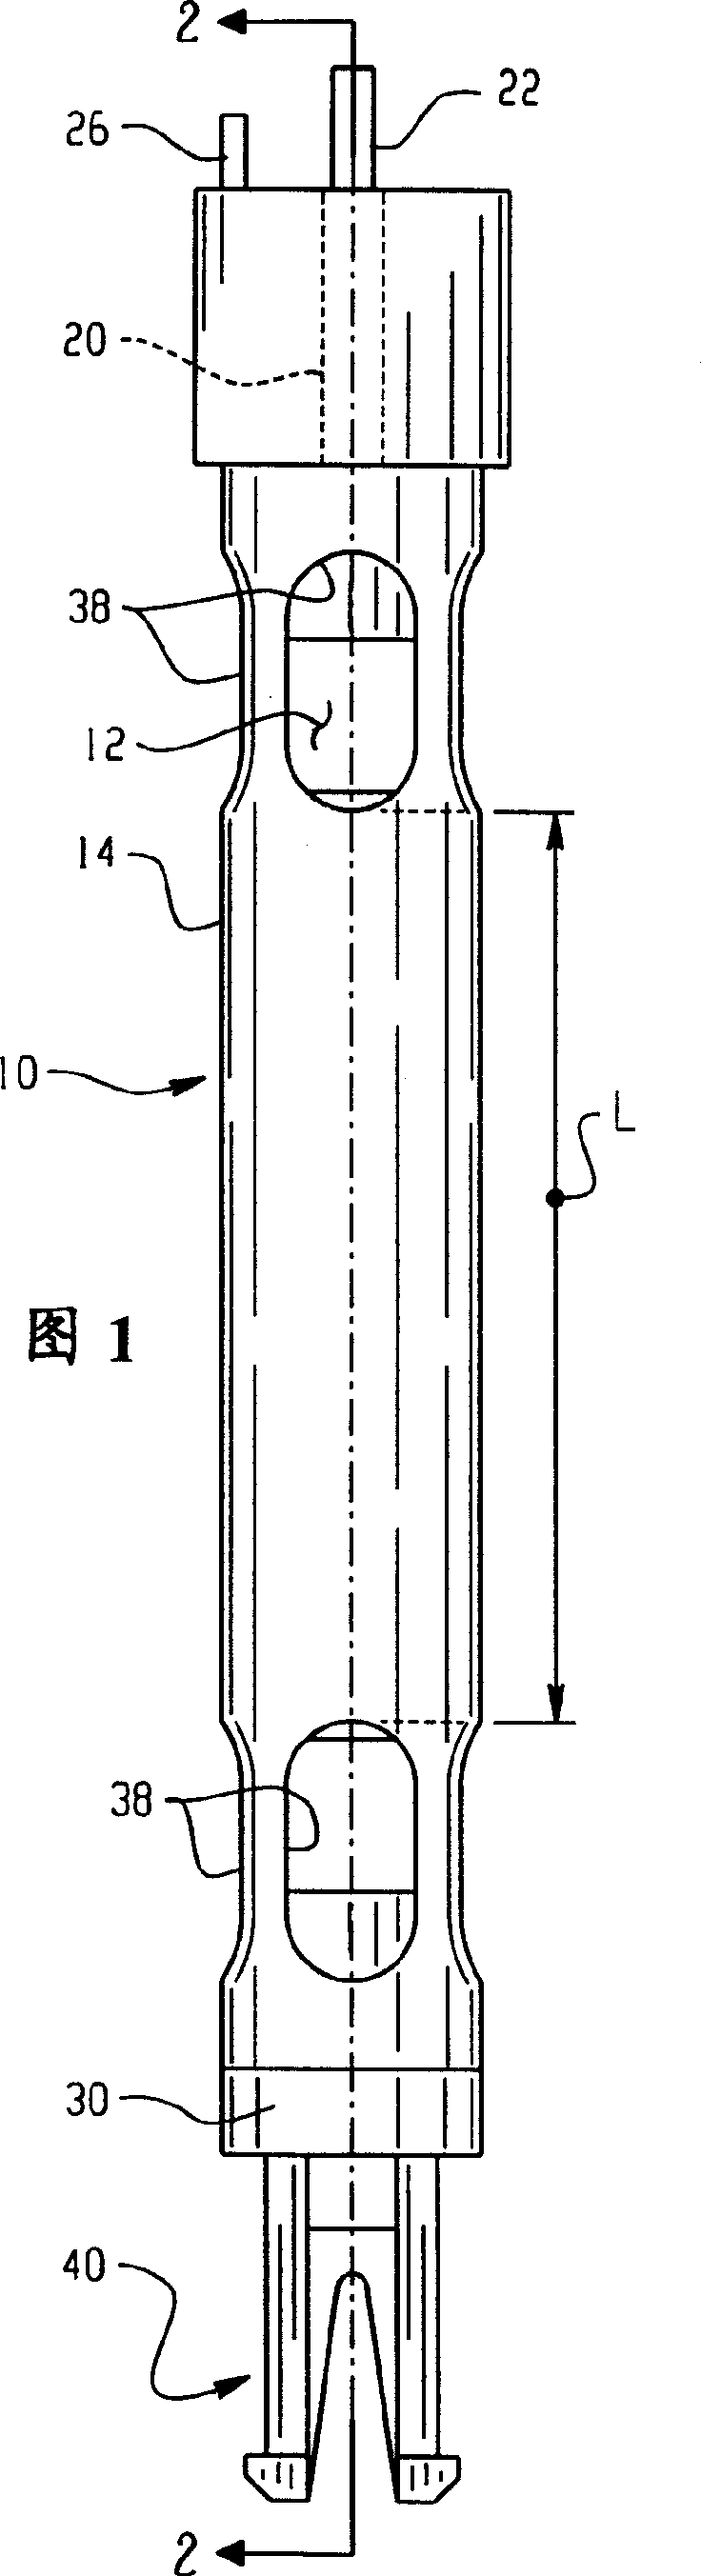 Probe assembly for a fluid condition monitor and method of making same